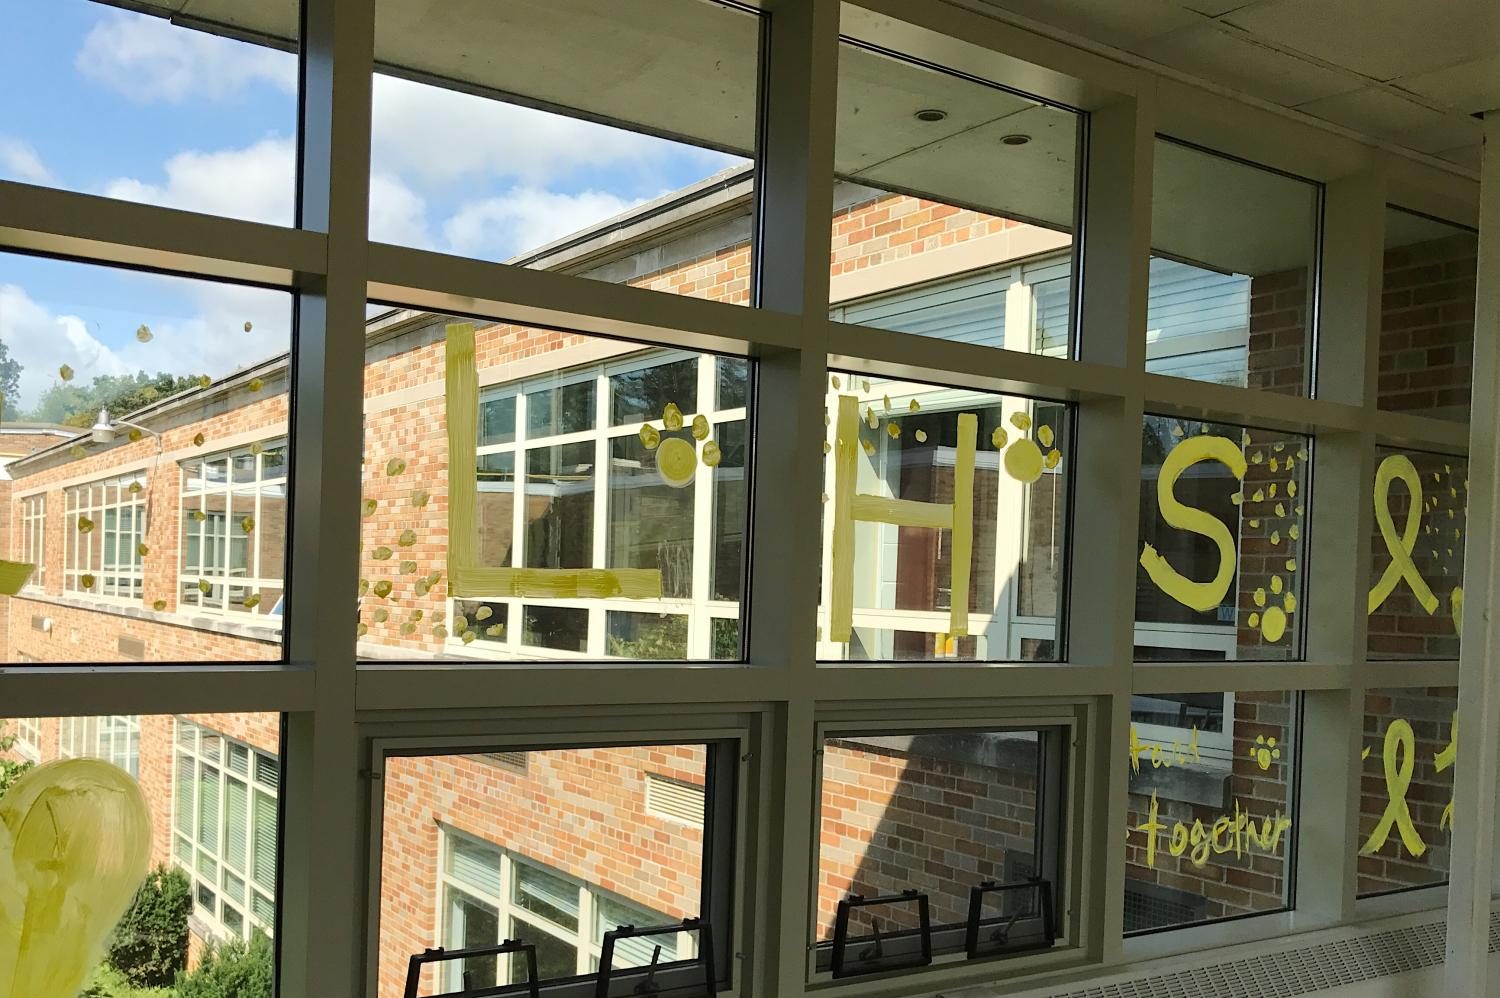 LHS students painted windows around the school to spread awareness about Yellow Ribbon week.